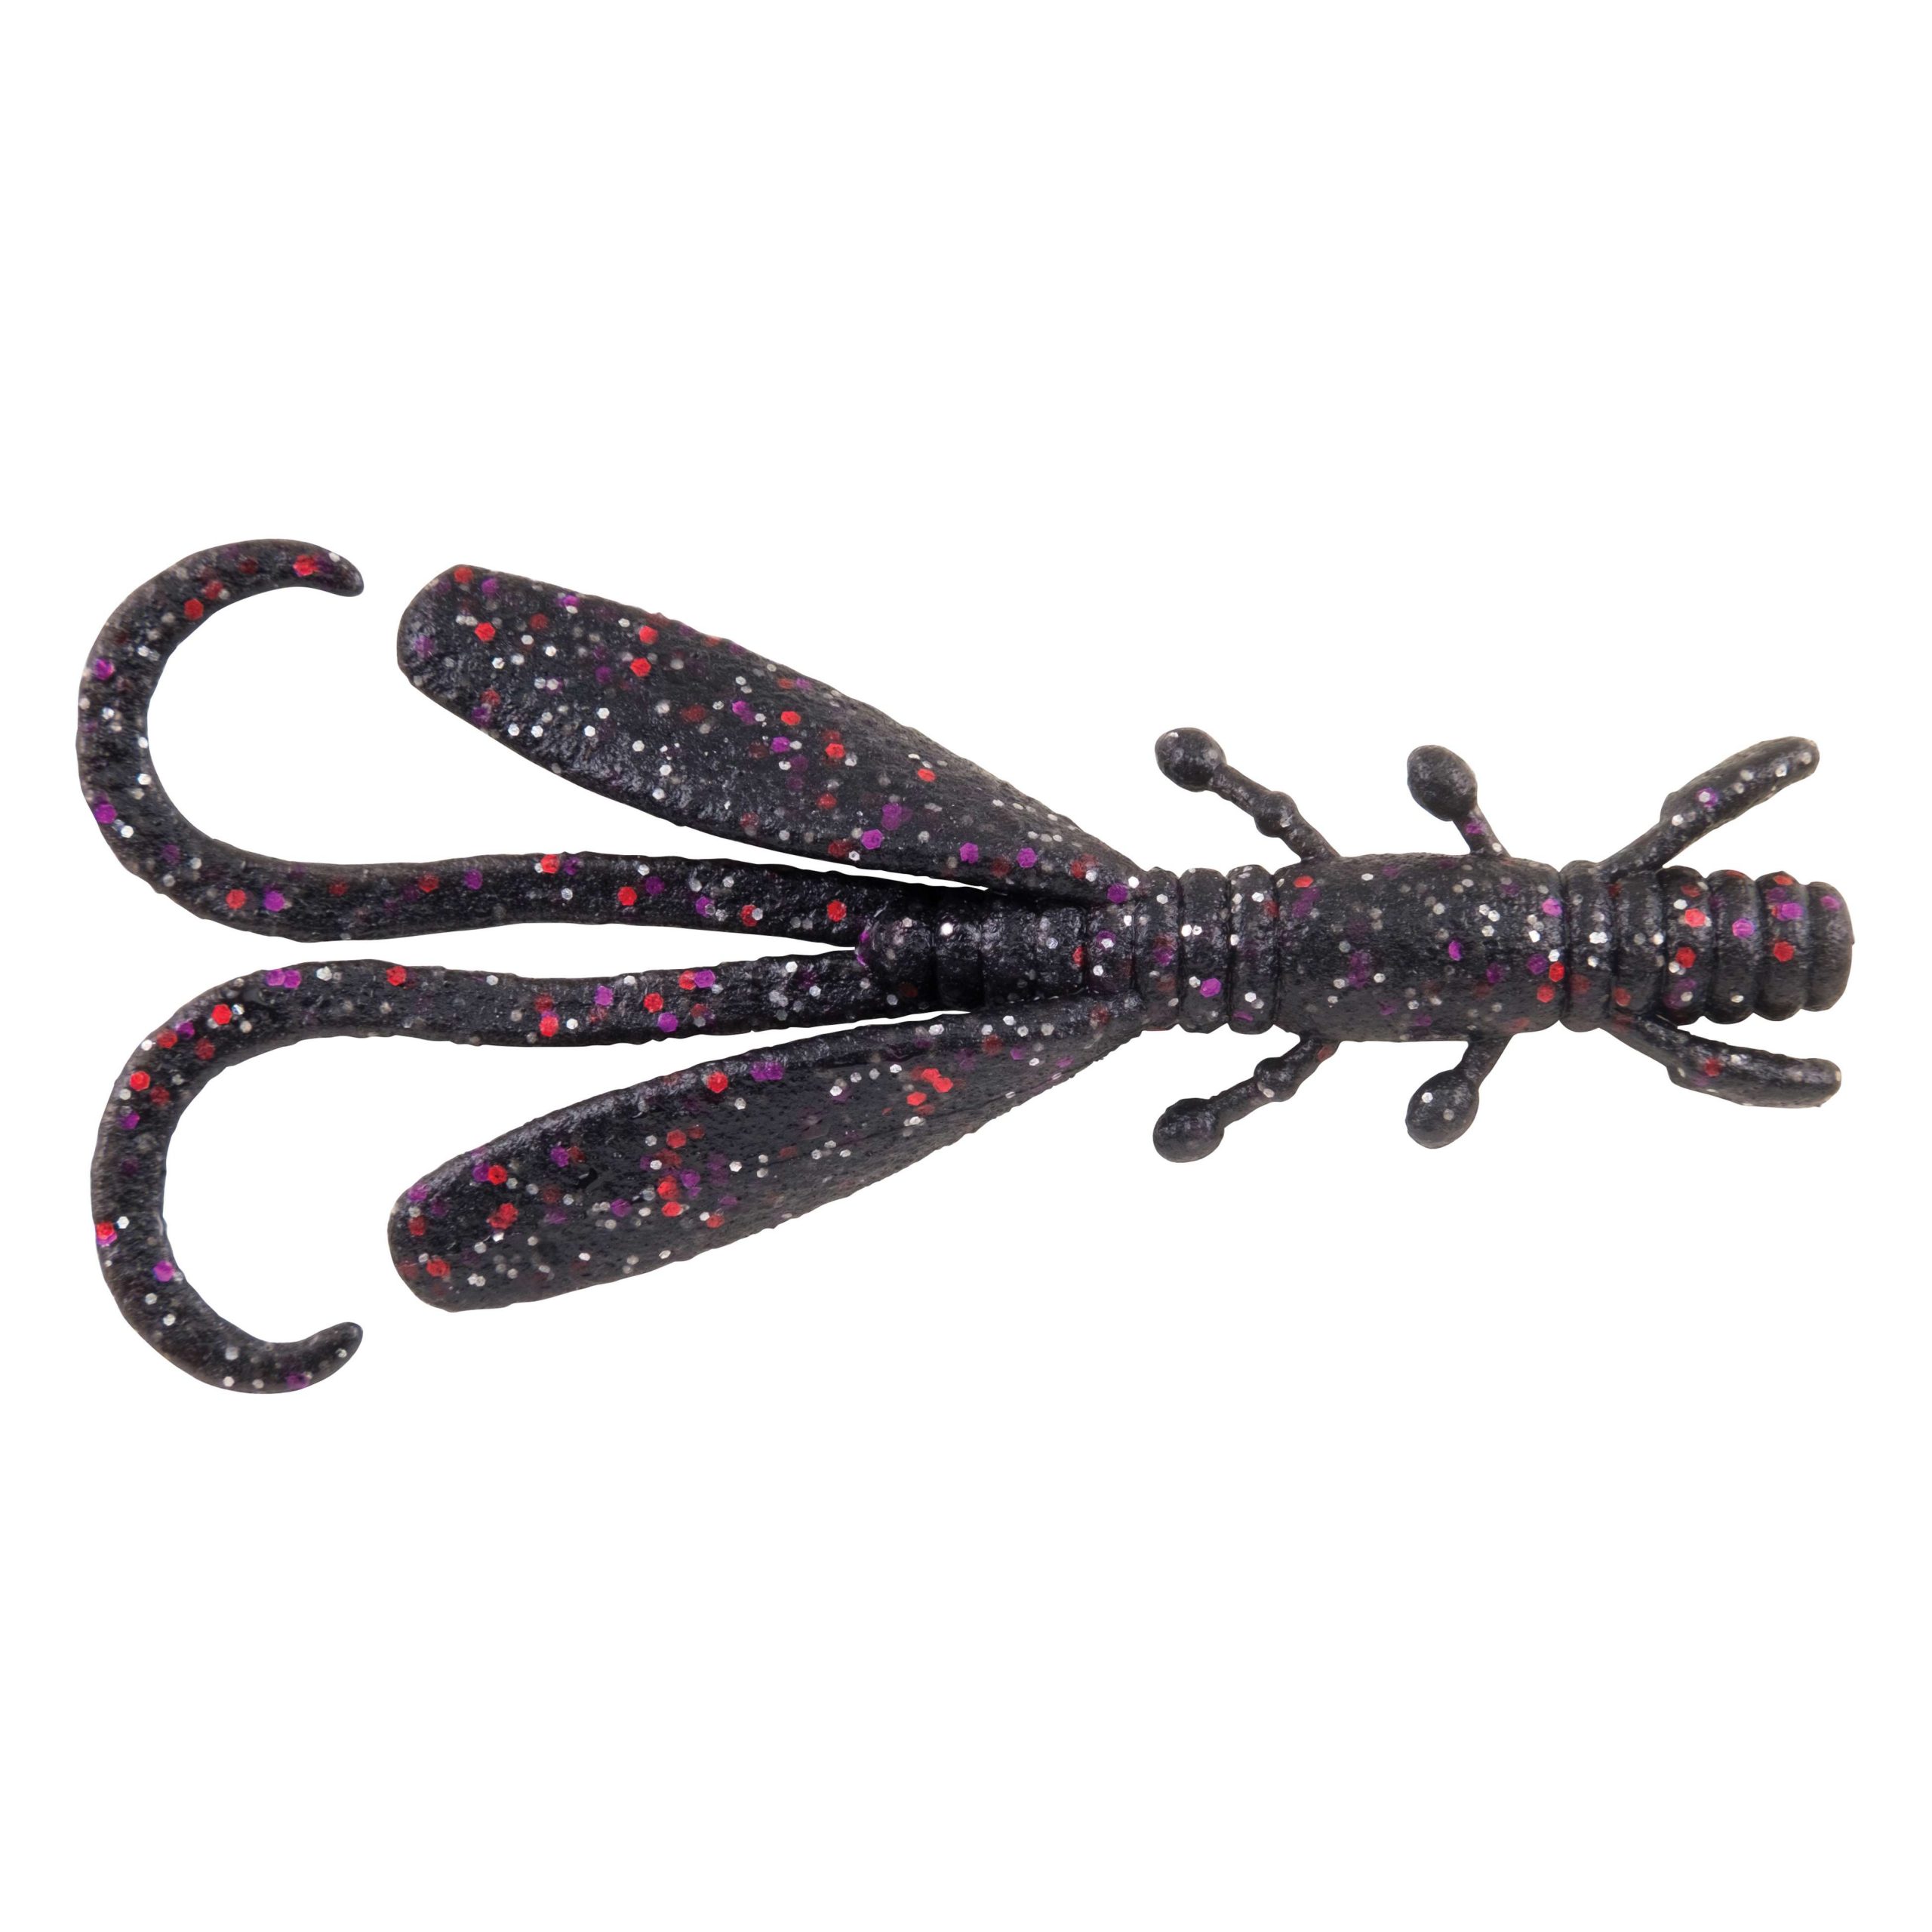 Powerbait MaxScent Critter Hawg<br>
Berkley<br>
$6.99<br>
Influenced by Berkley's pro team in Japan. Unique tail and compelling leg actions are sure to draw fish to strike.			